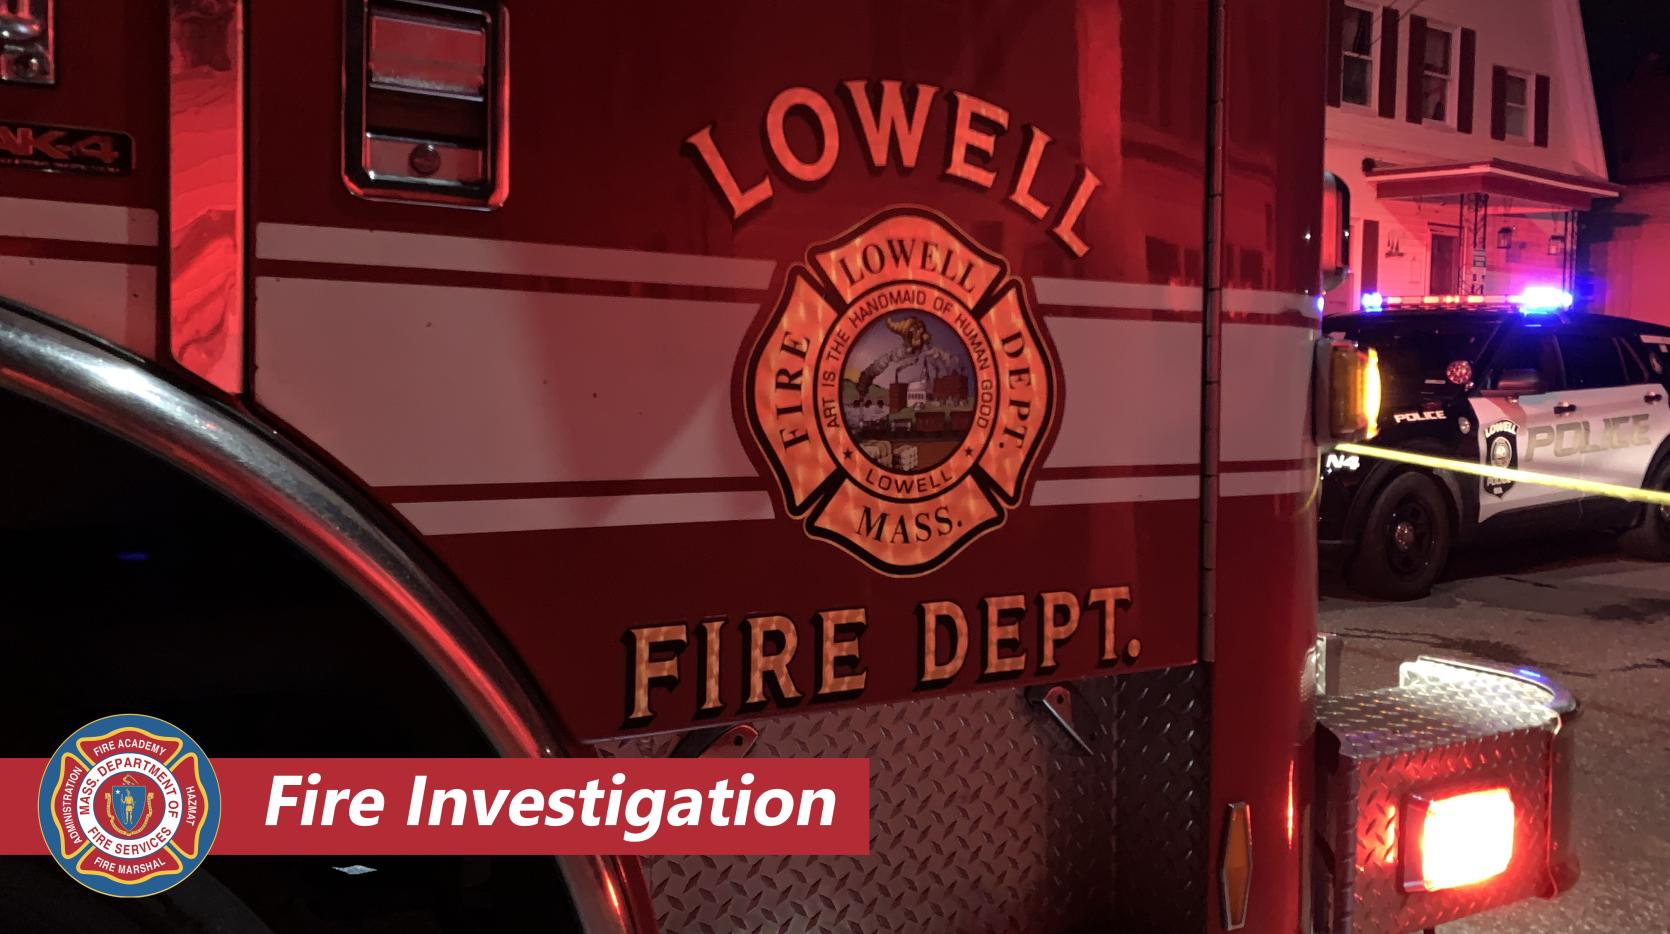 photo of a Lowell fire engine